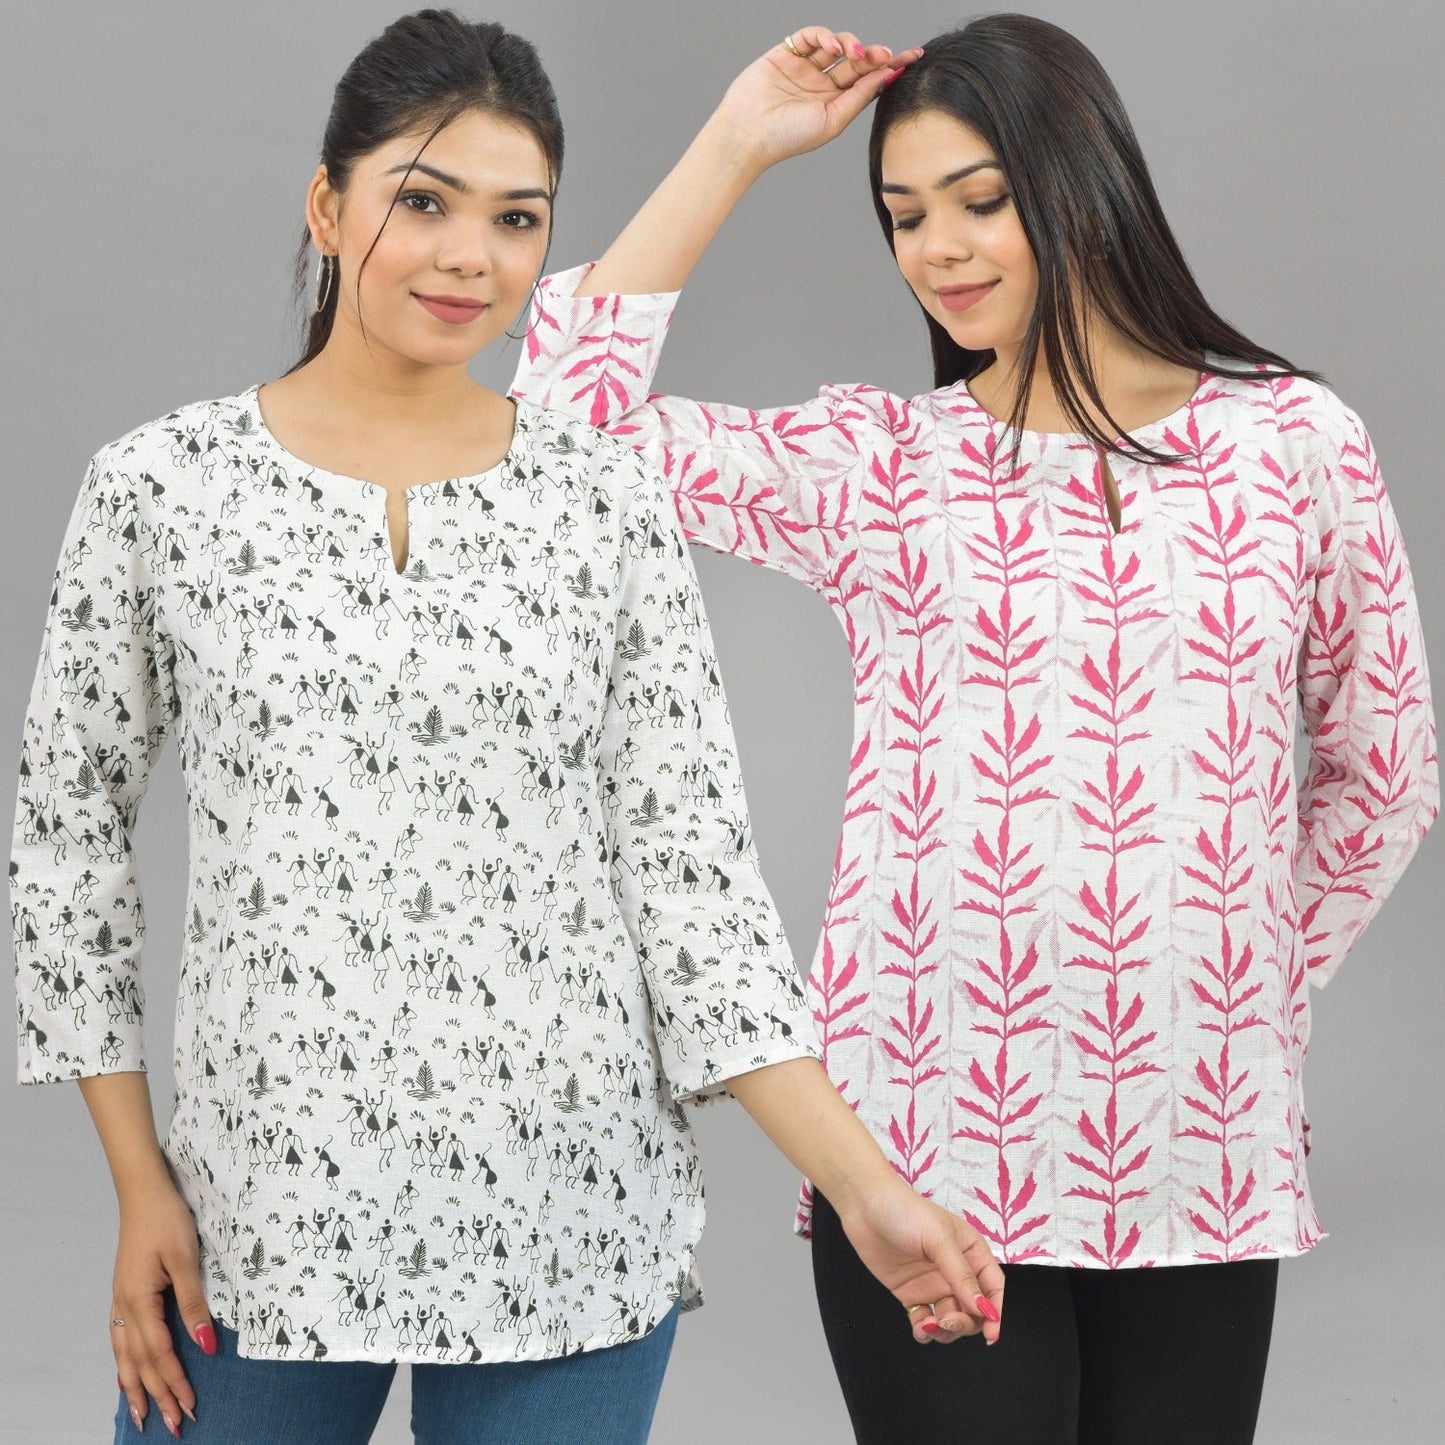 Pack Of 2 Womens Regular Fit Black Vector And Pink Leaf Printed Tops Combo